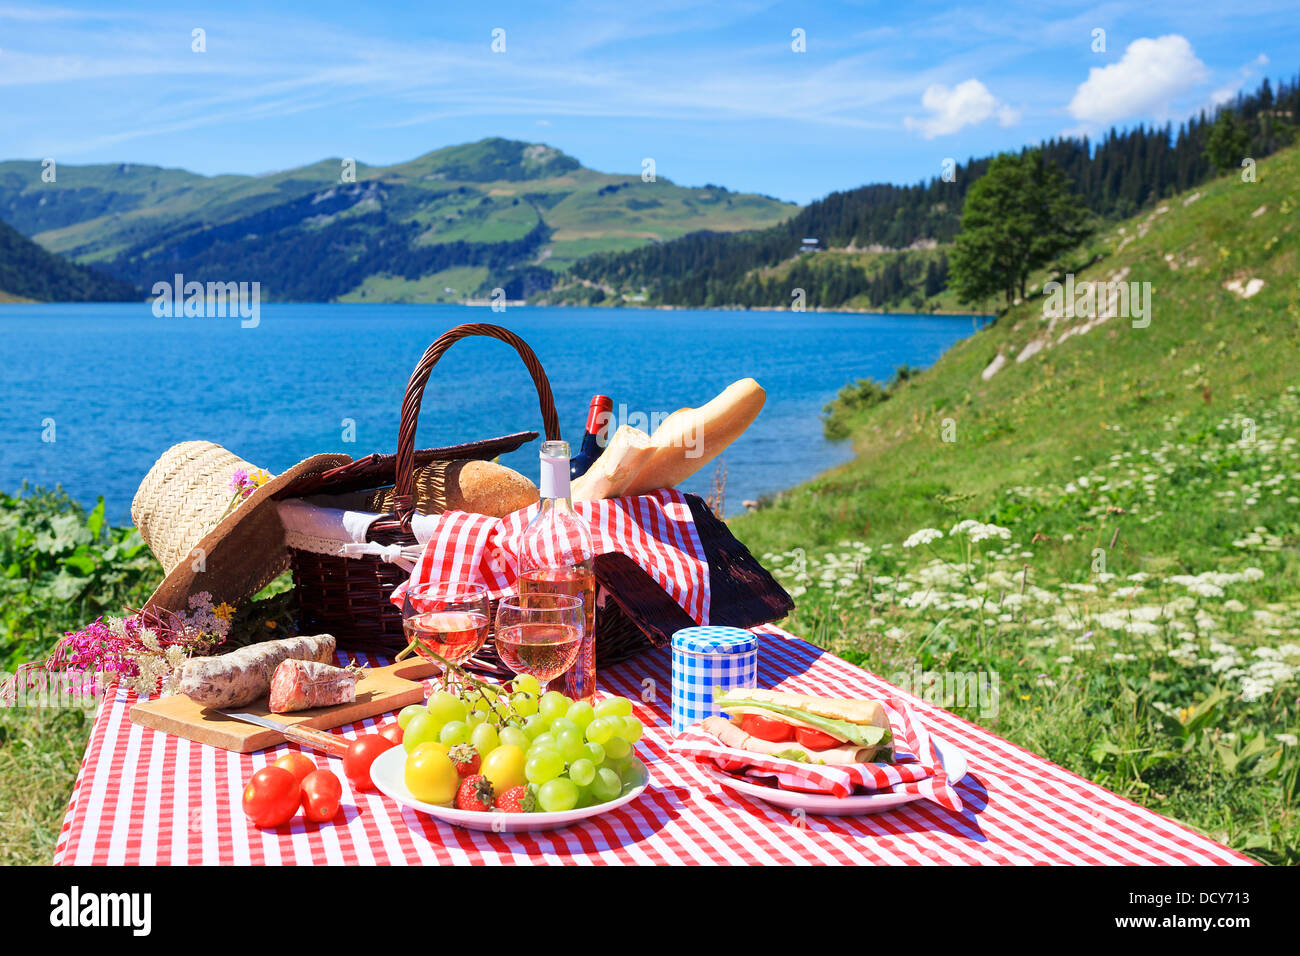 Picnic in french alpine mountains with lake Stock Photo